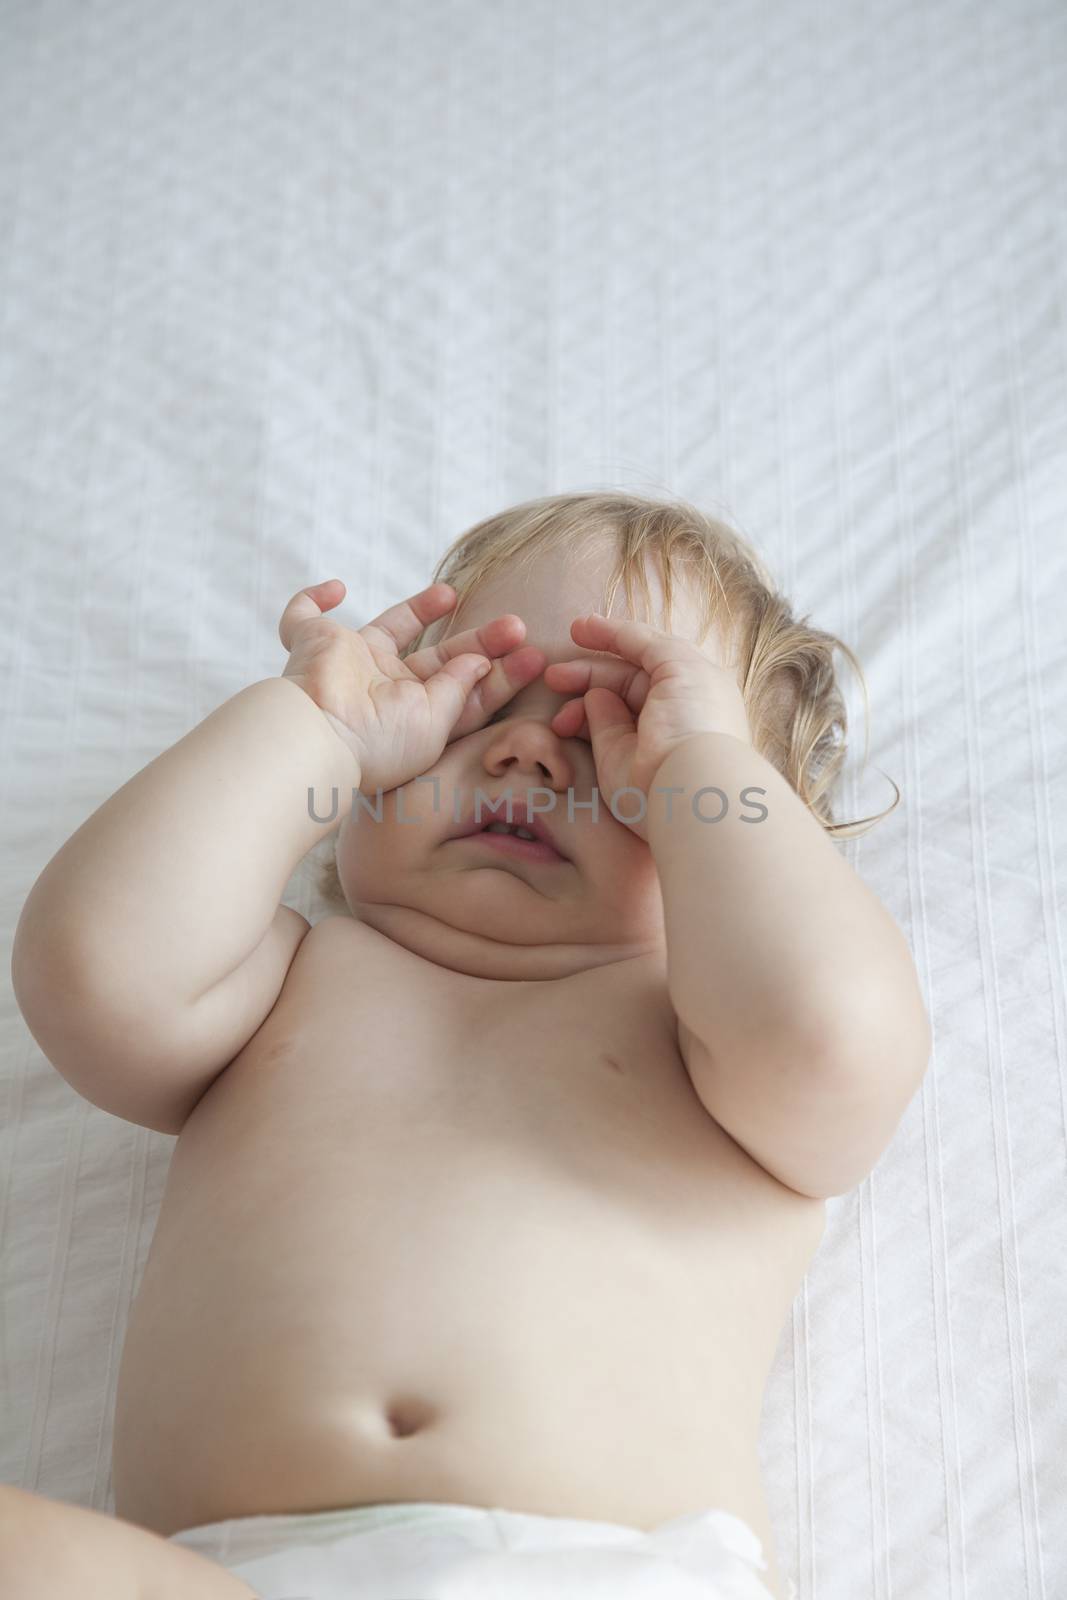 one year blonde baby diaper touching her eyes over white bedcover